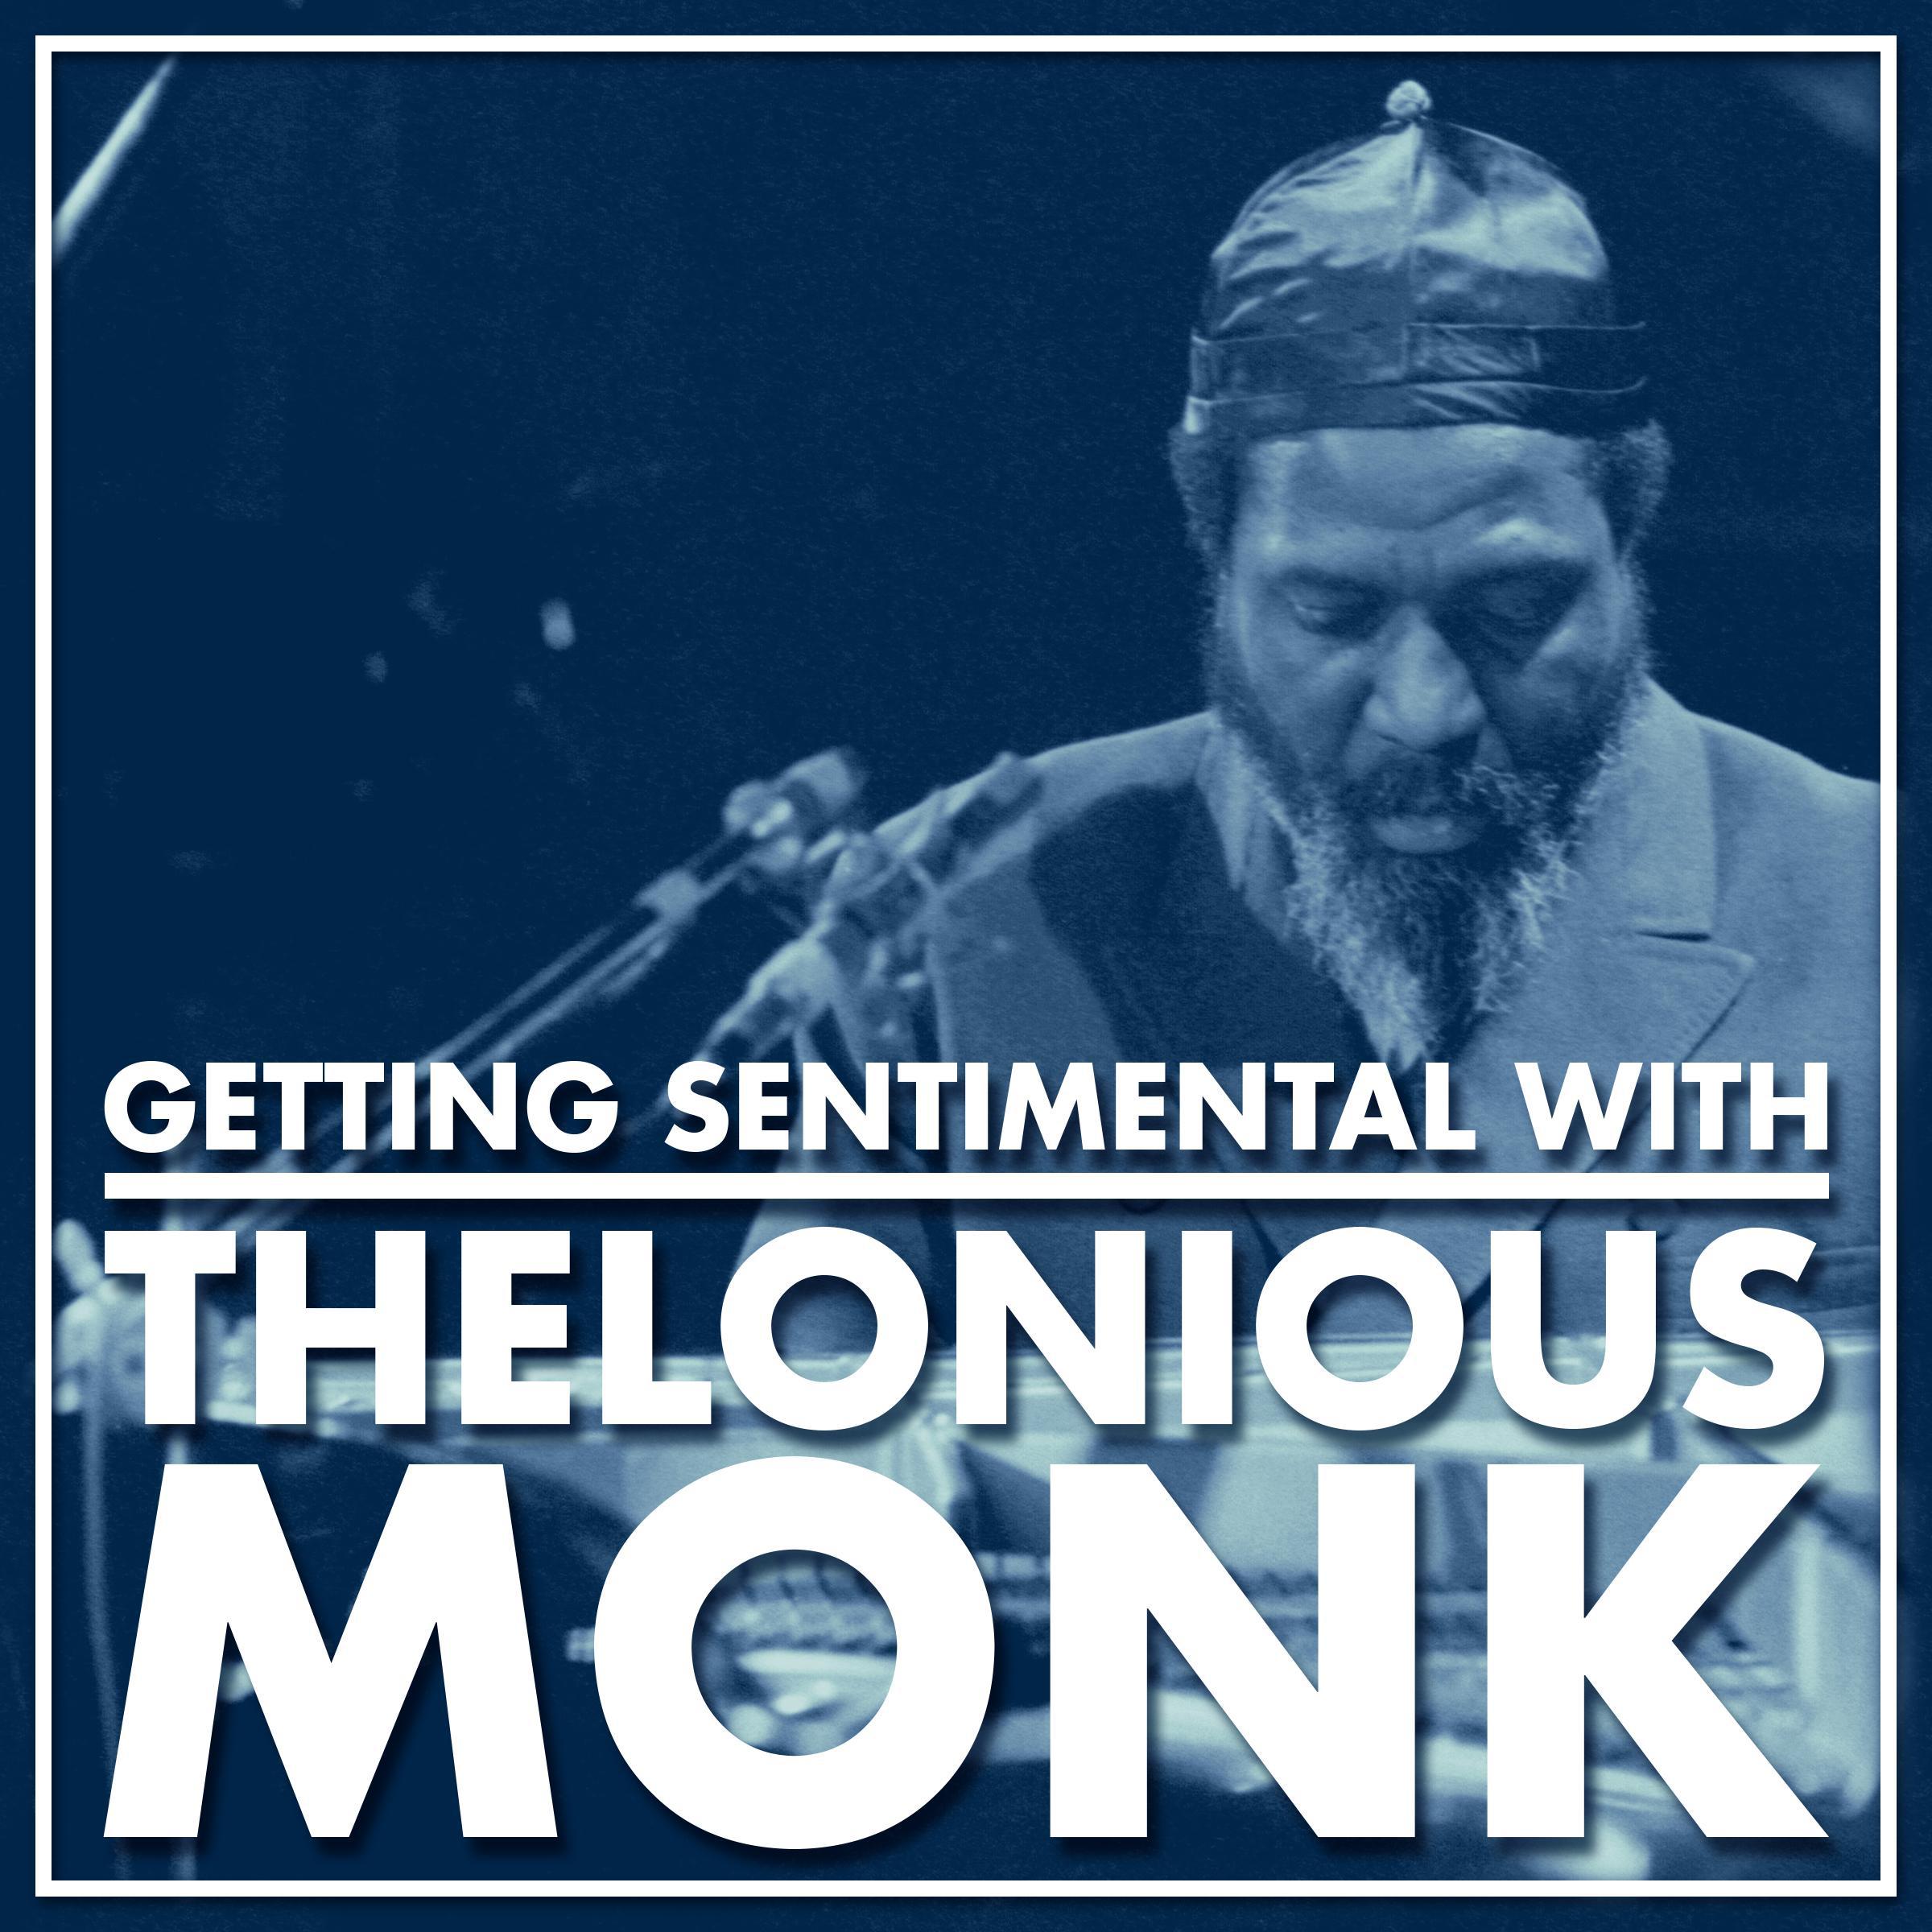 Getting Sentimental with Thelonious Monk